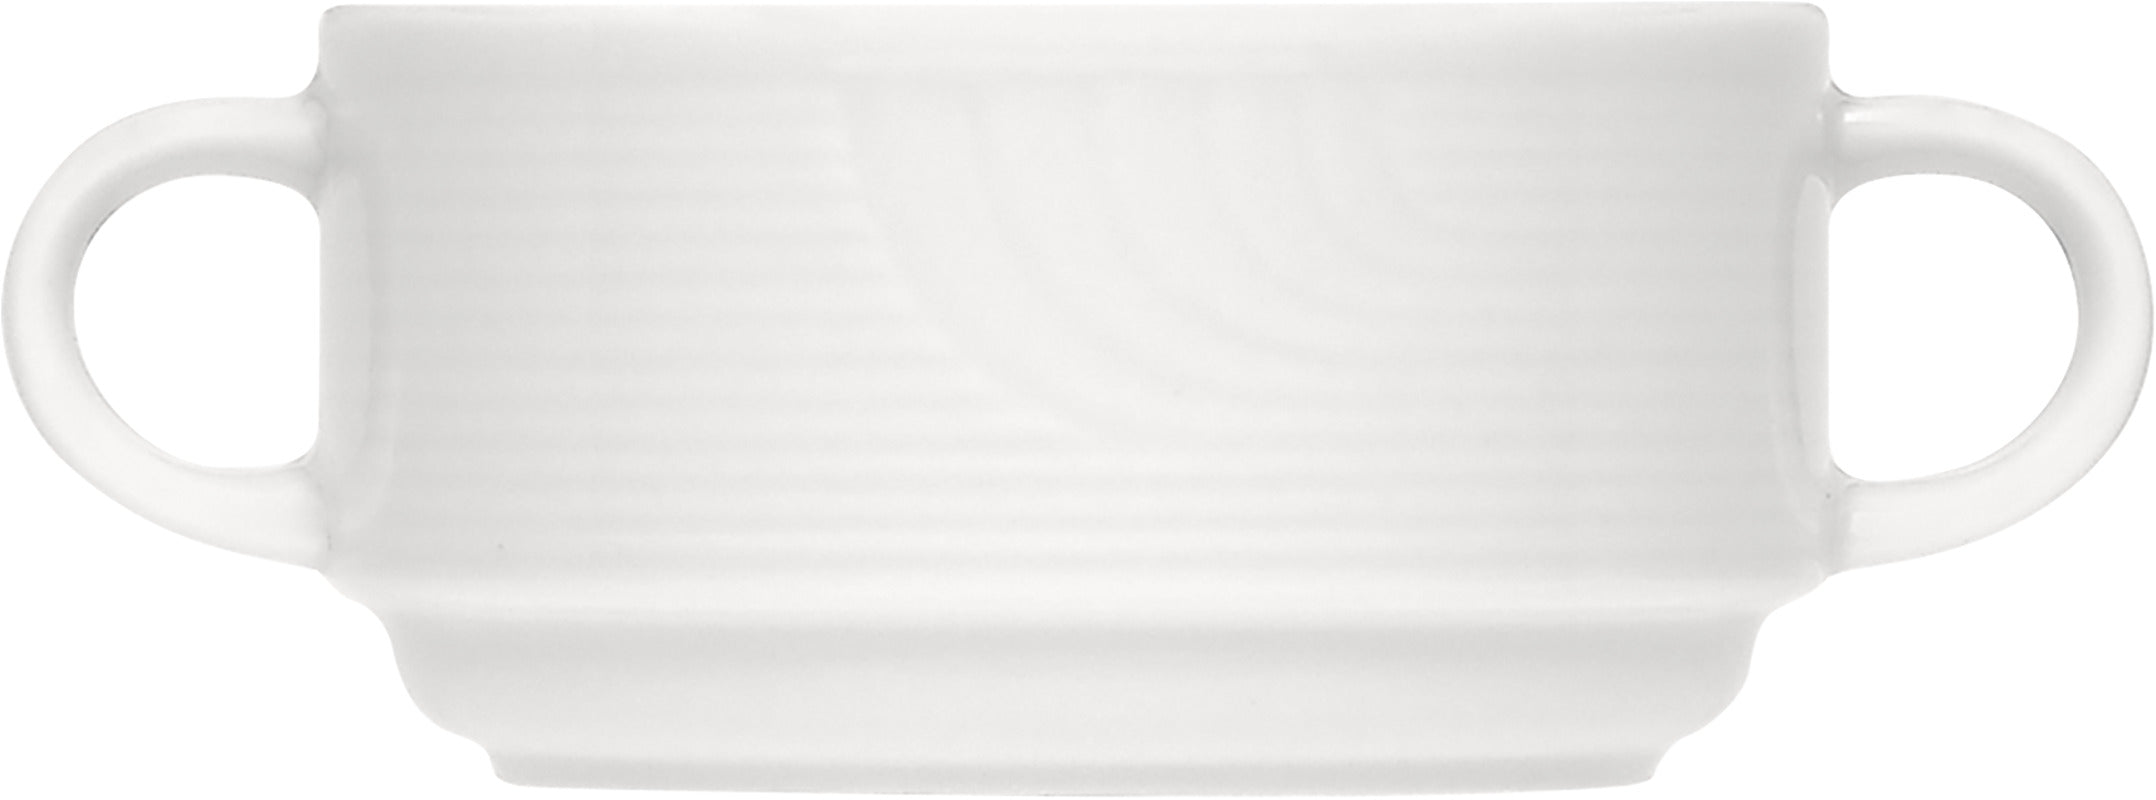 White Cream Soup Cup with Handles, Stackable 4